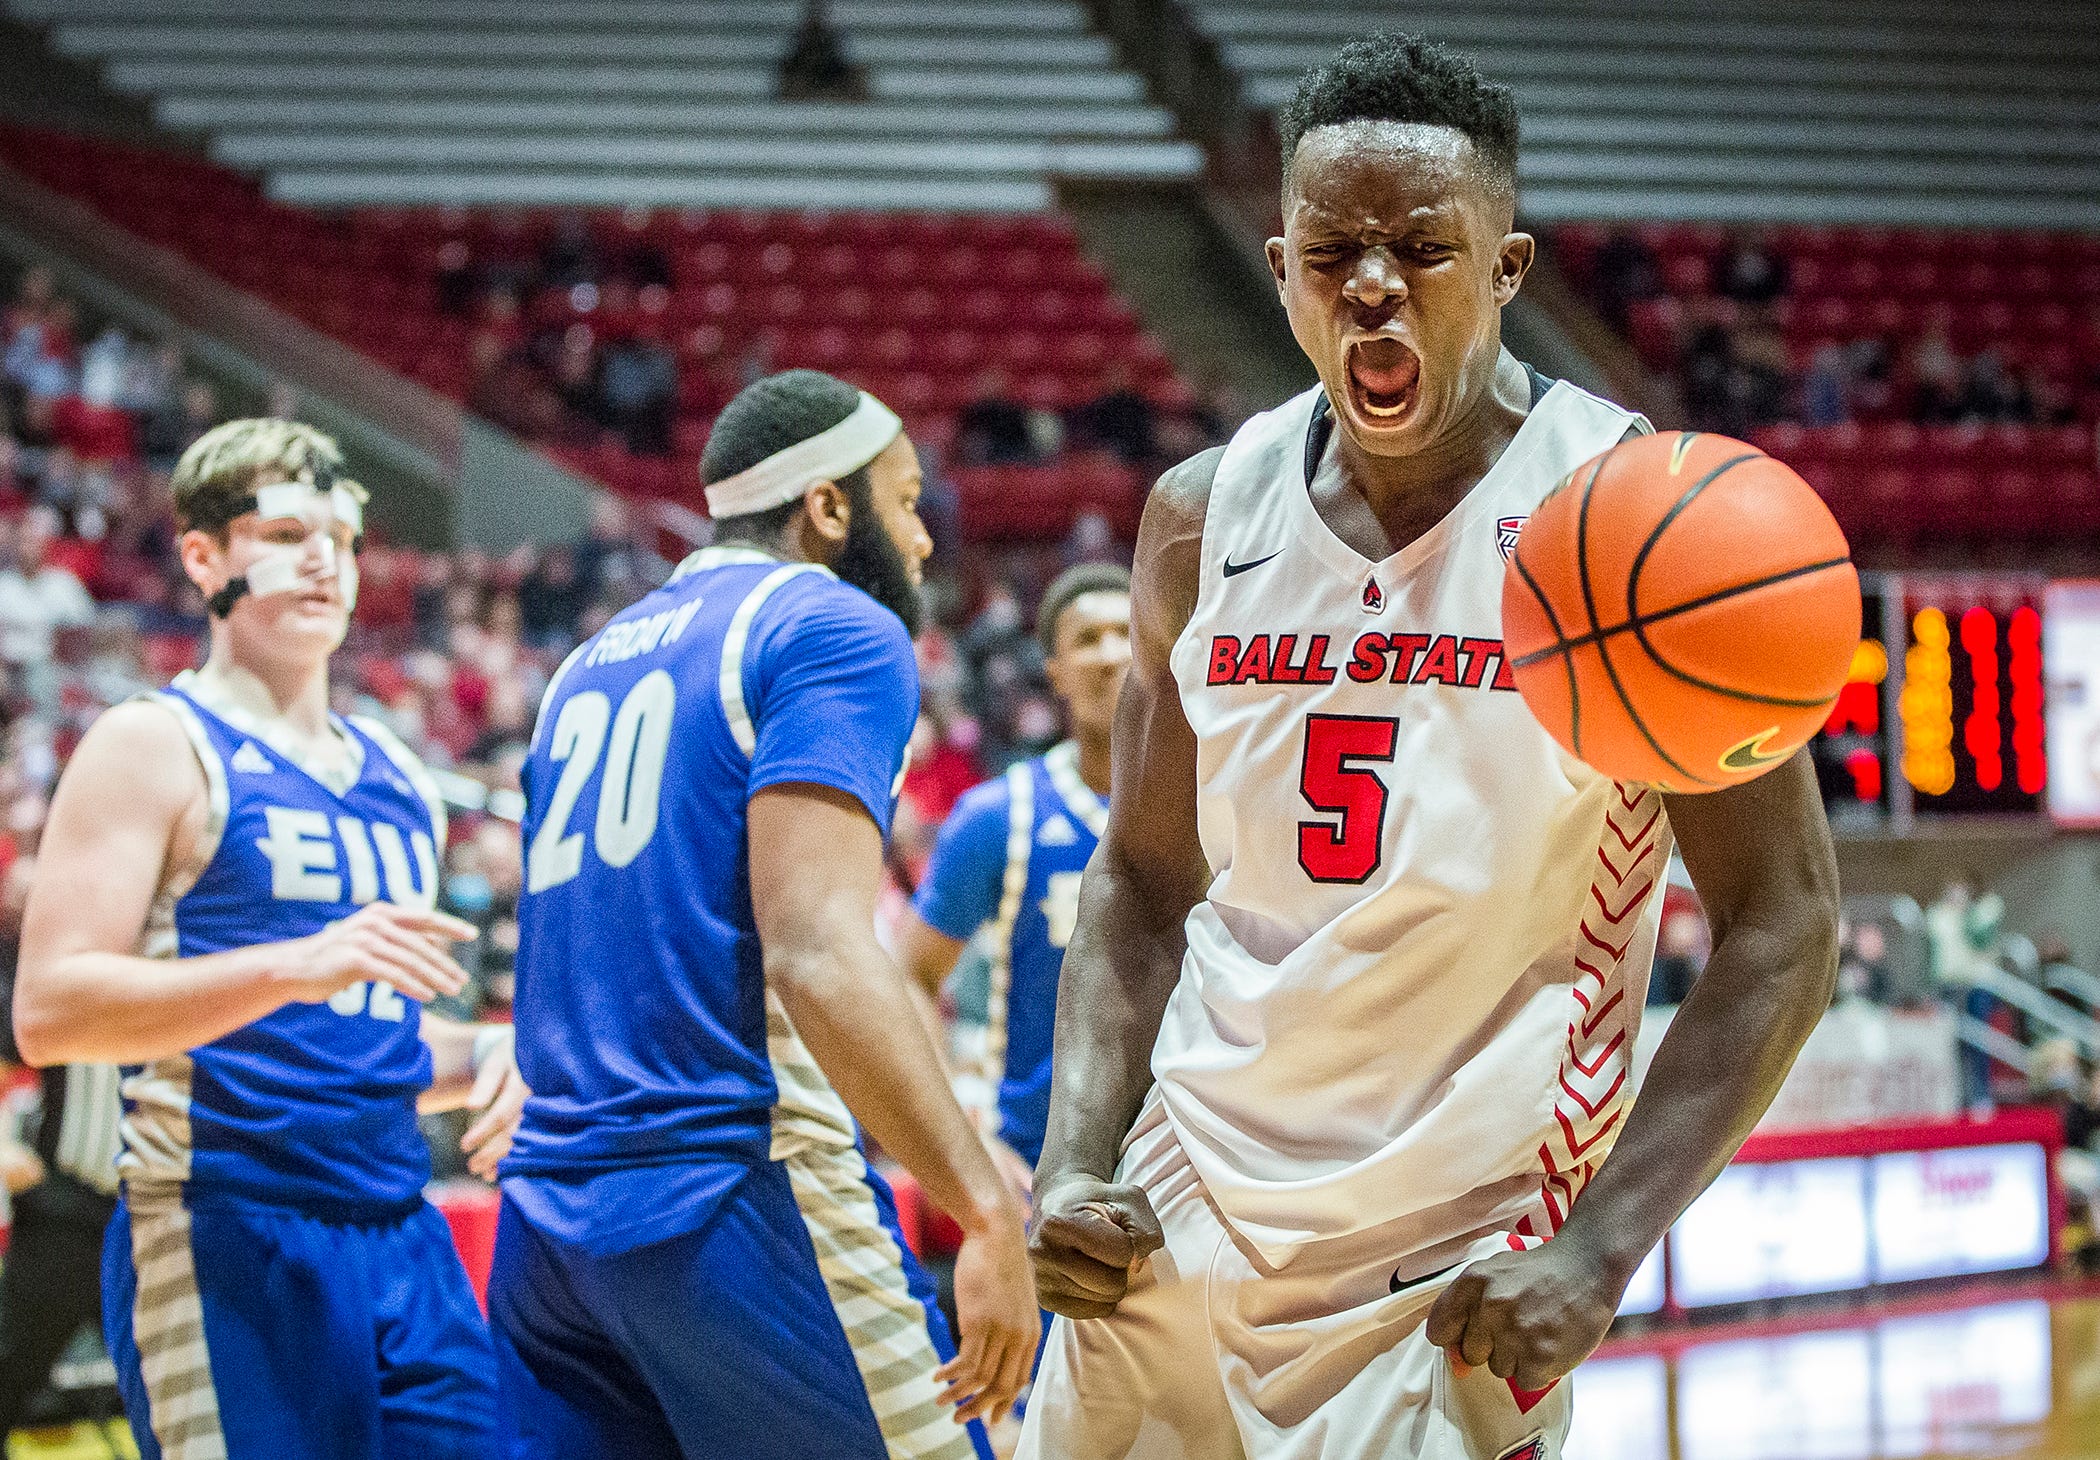 Ball State men's basketball Breaking down the nonconference schedule